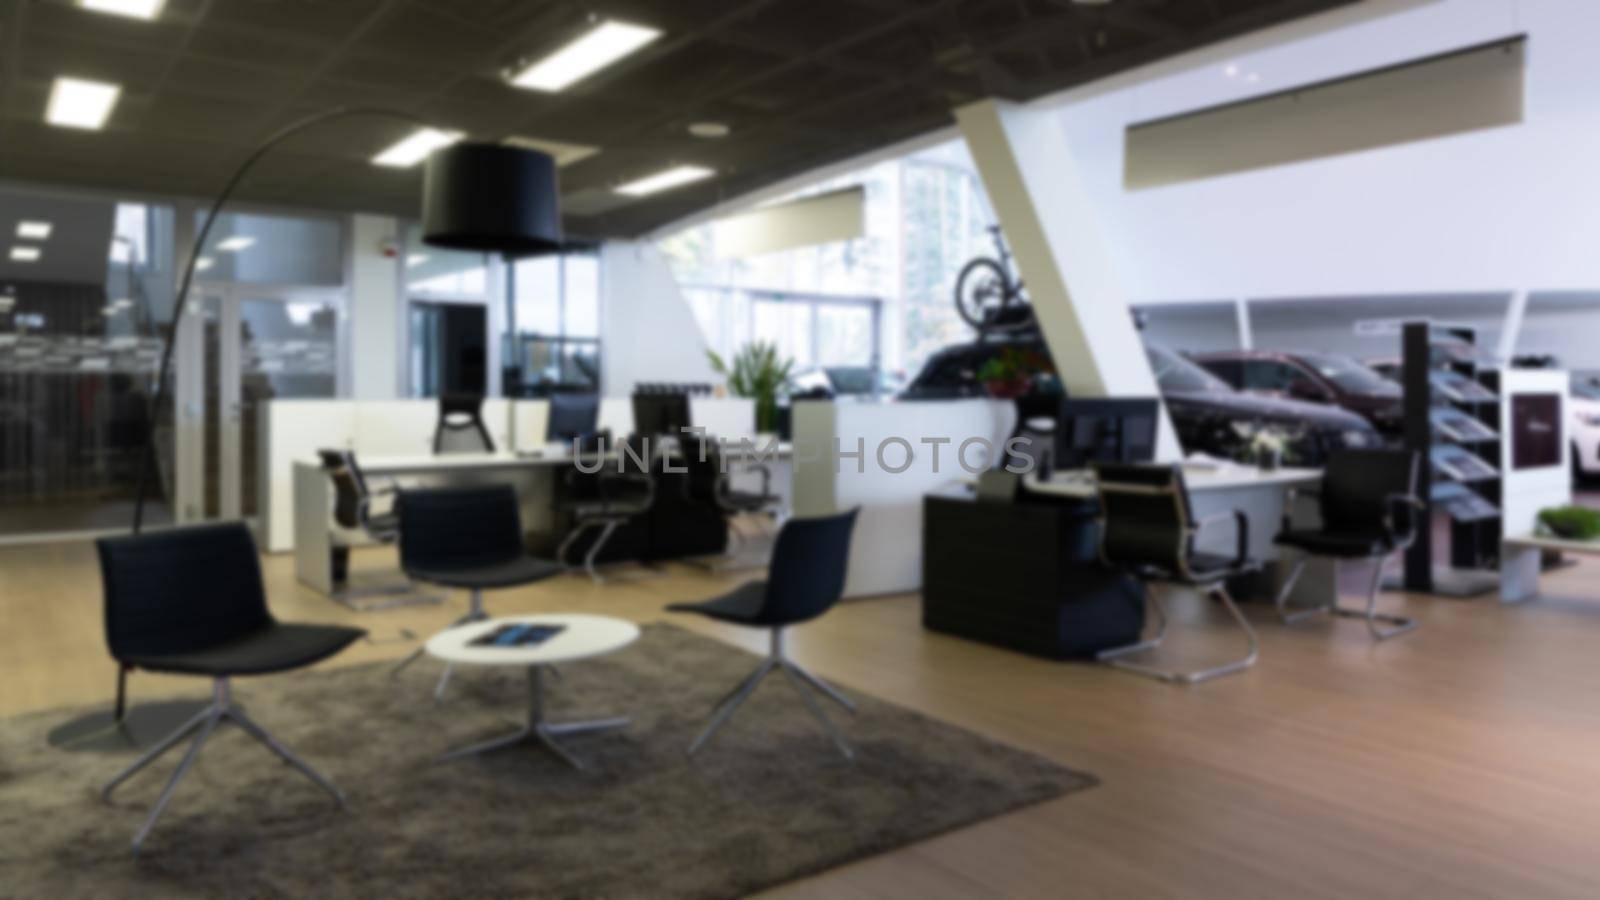 reception of a dealership car showroom of premium cars, photo with blur, modern office interior.